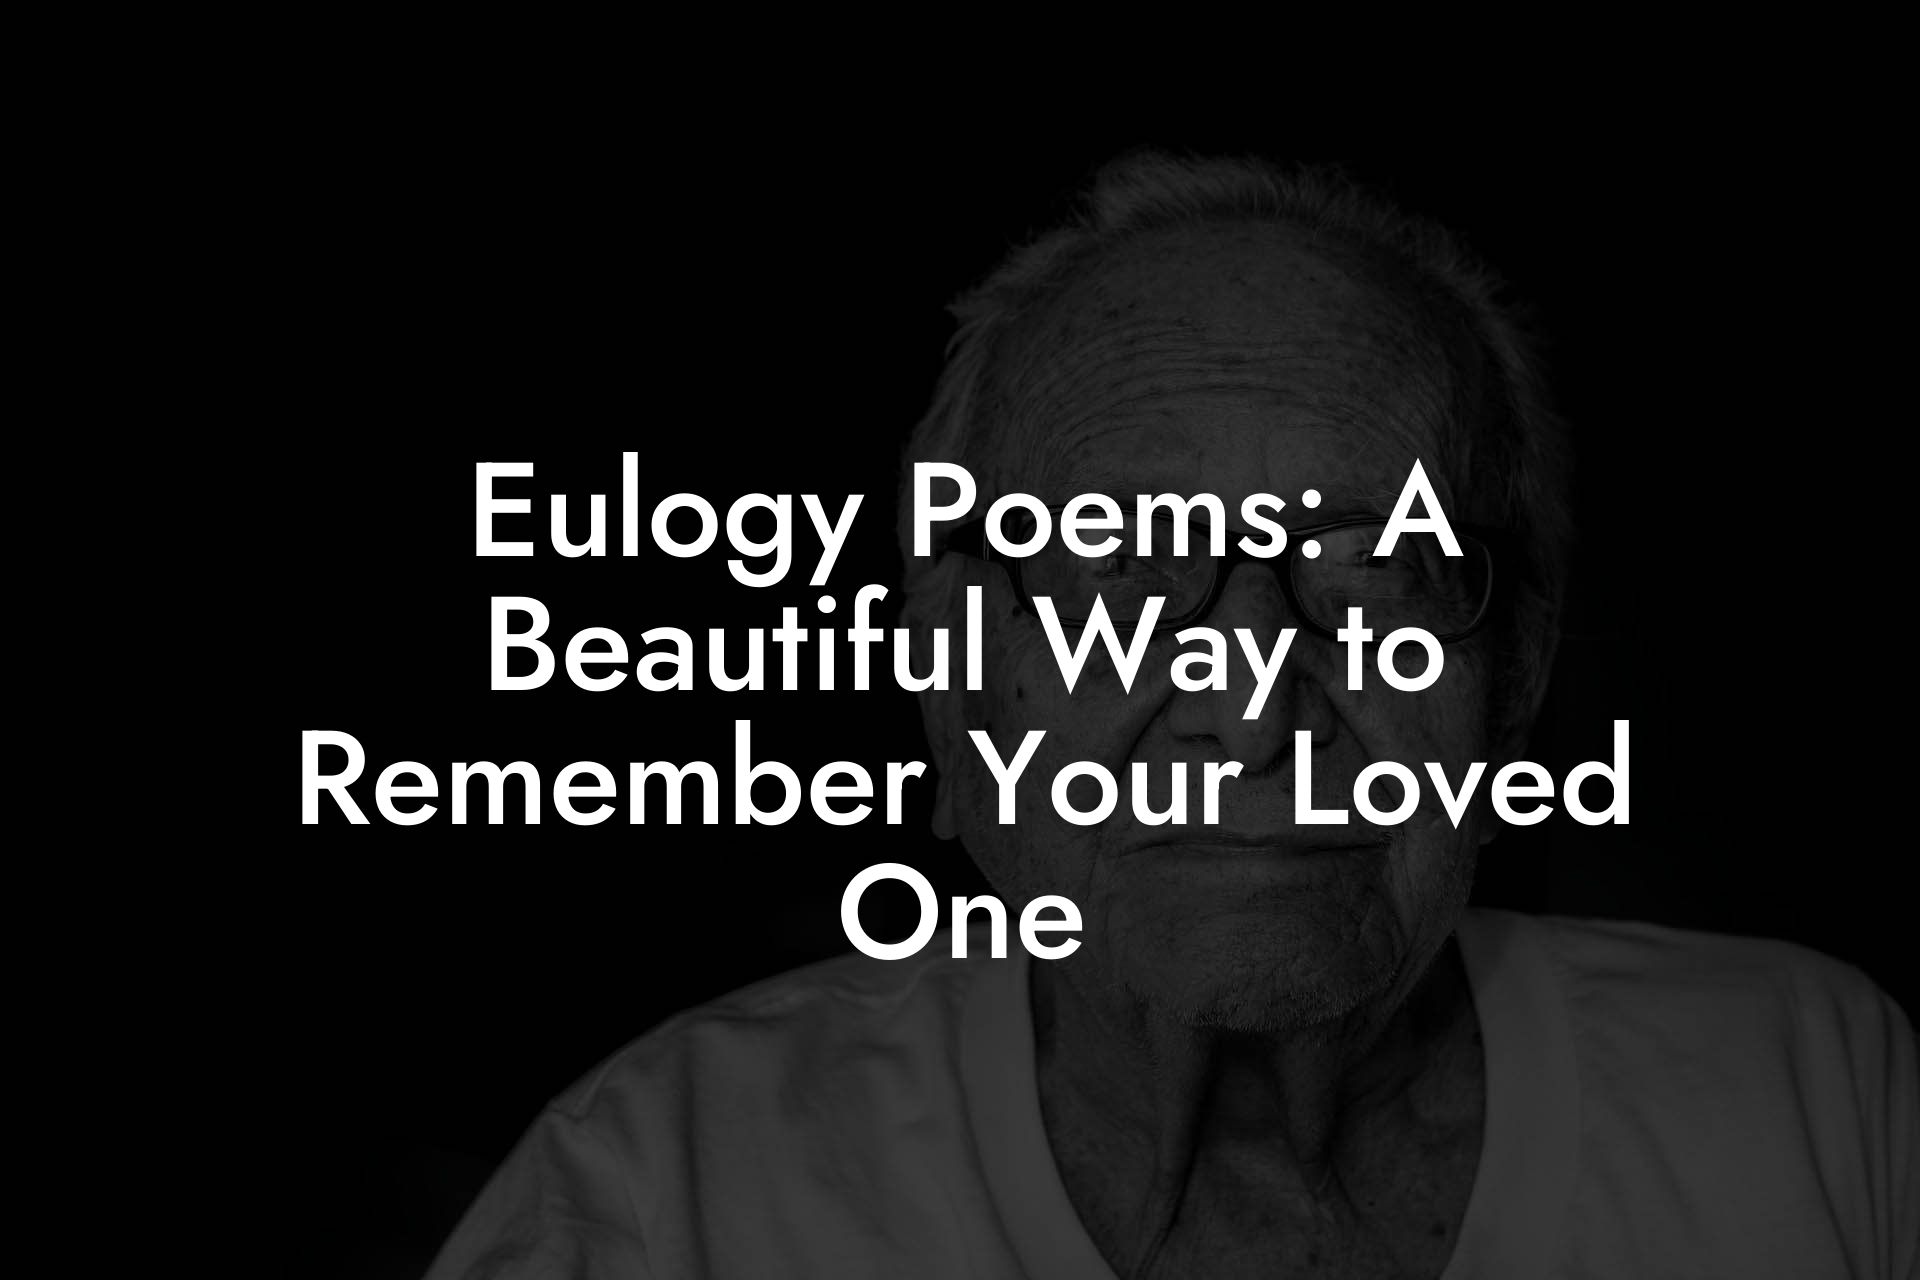 Eulogy Poems: A Beautiful Way to Remember Your Loved One